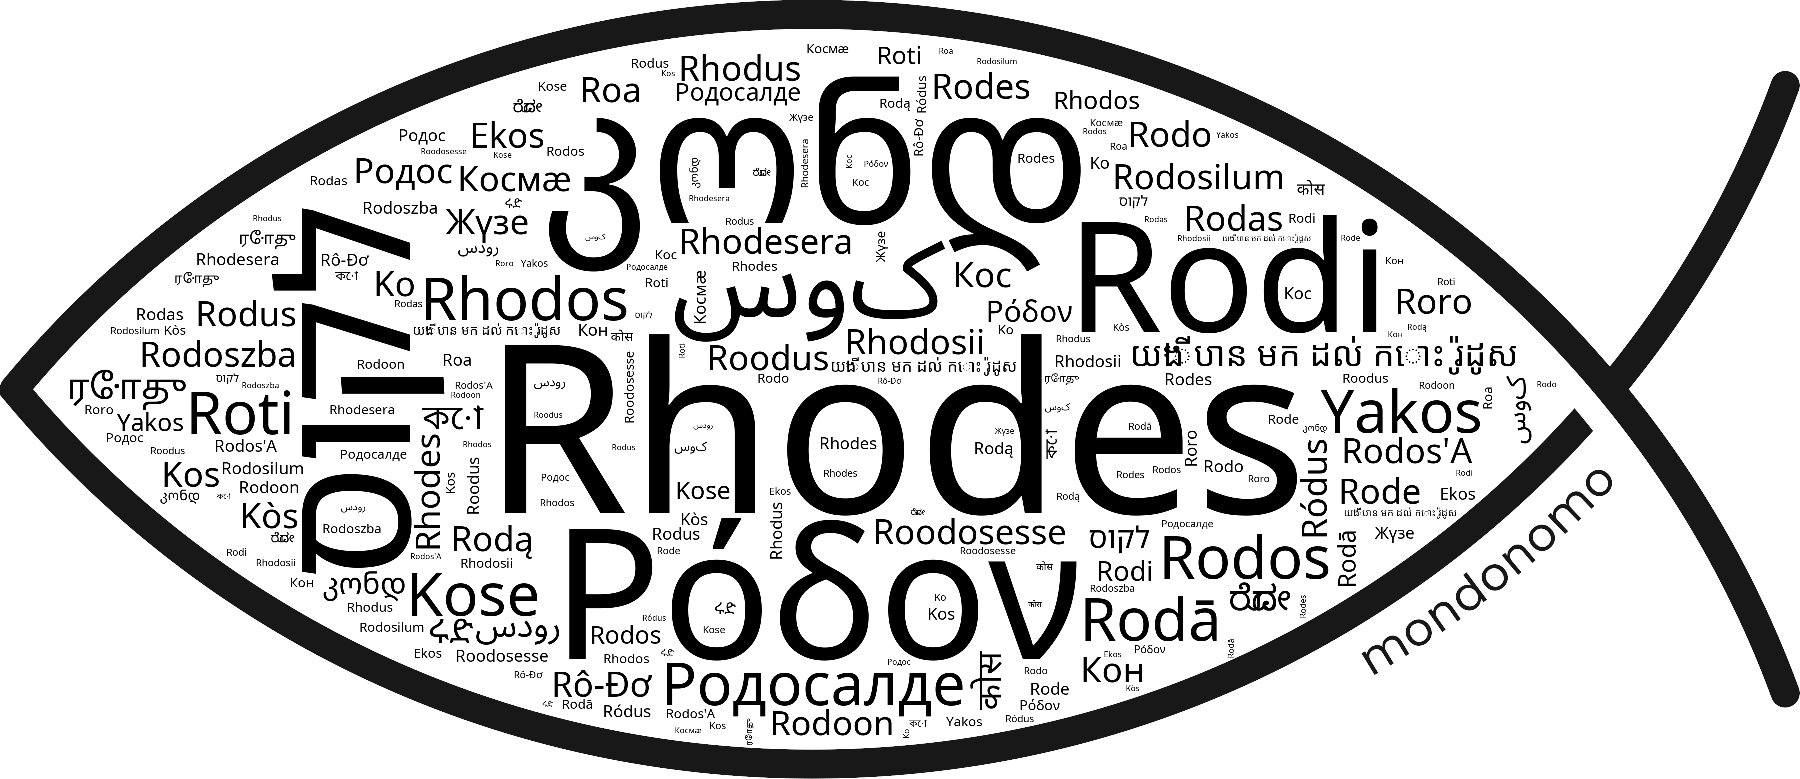 Name Rhodes in the world's Bibles